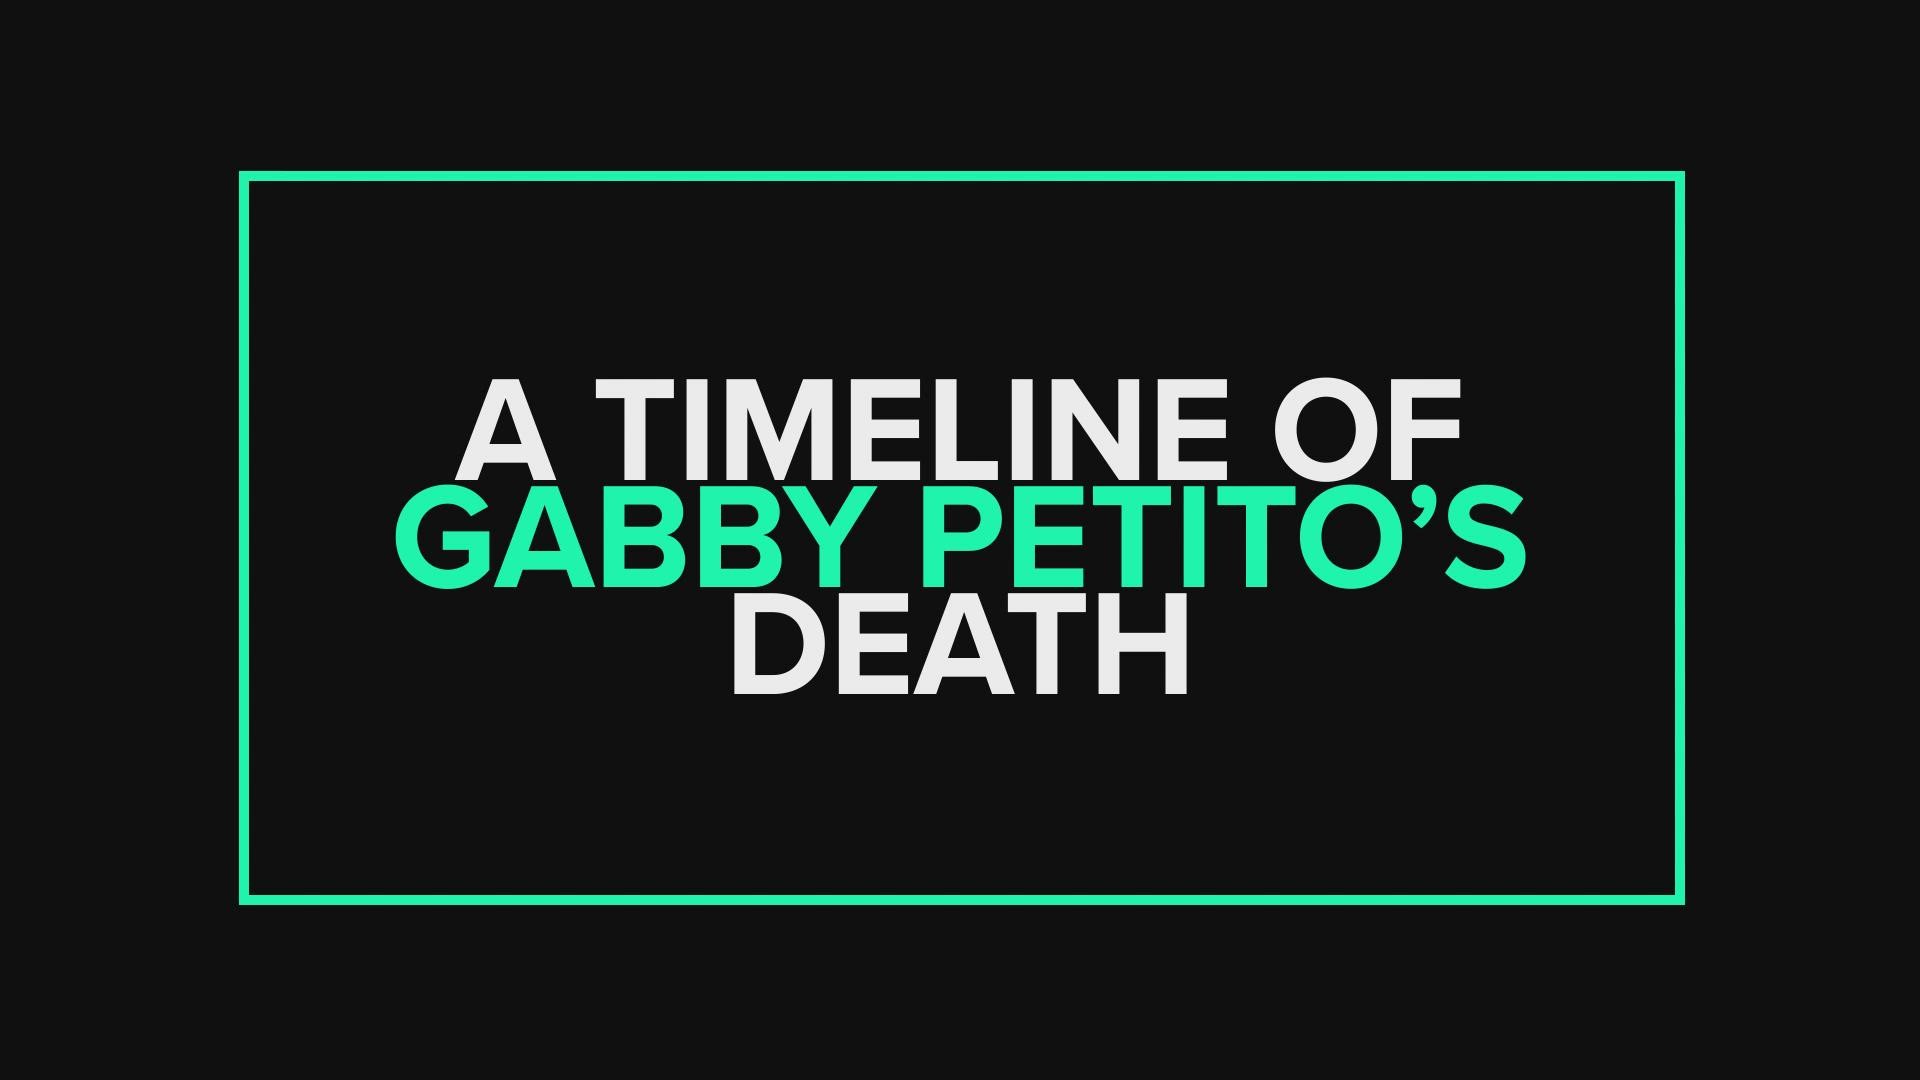 We've learned Gabby Petito died from strangulation. Now we're sharing a timeline of events leading up to this point.